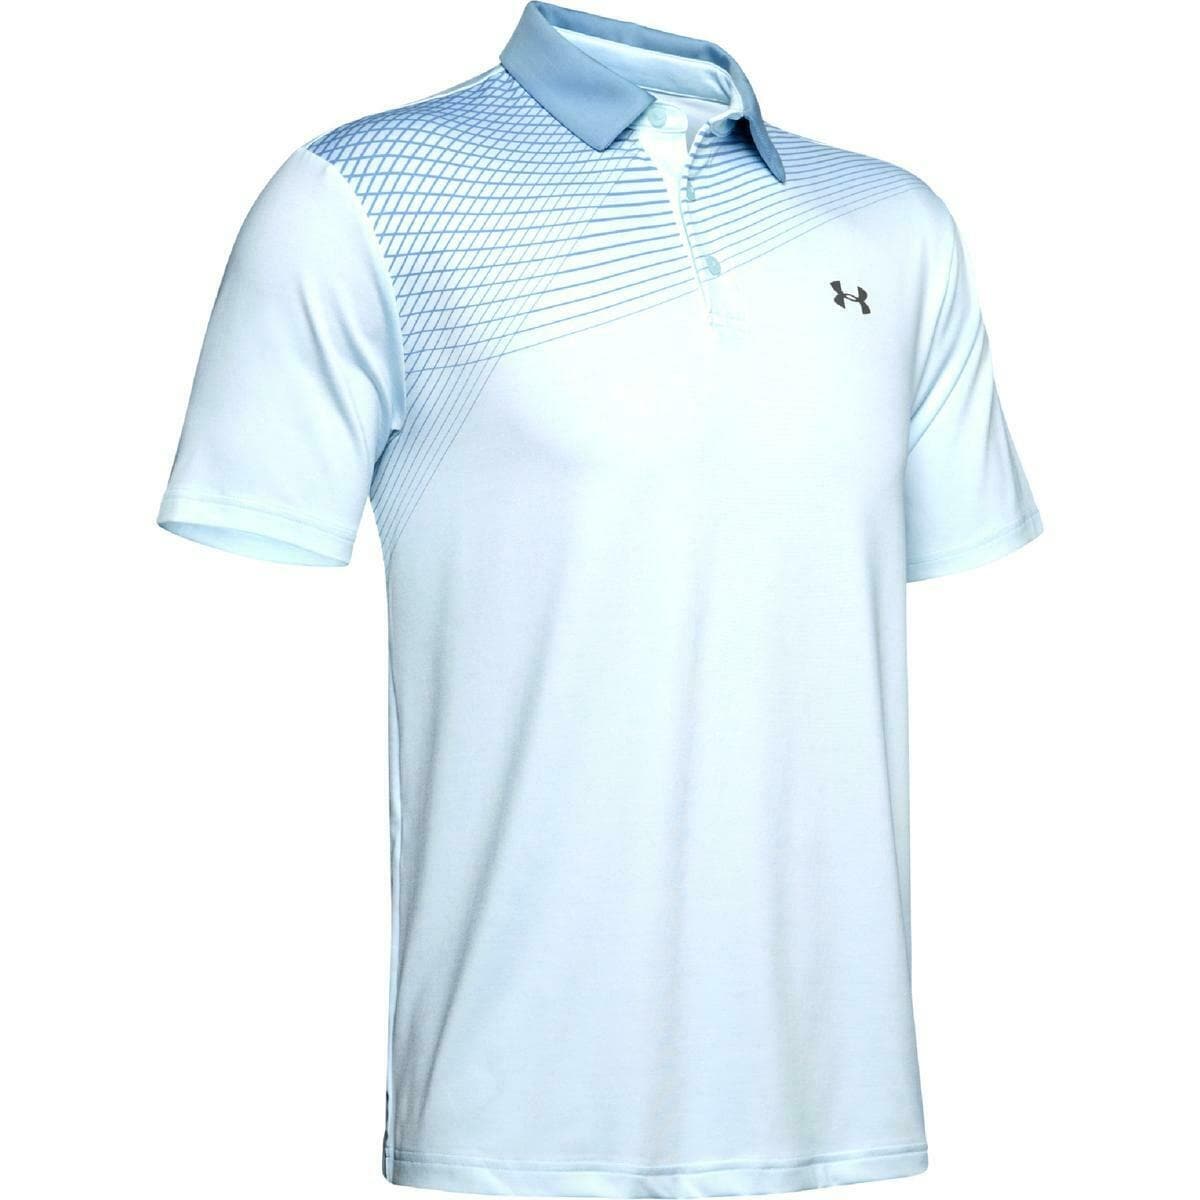 blue under armour top